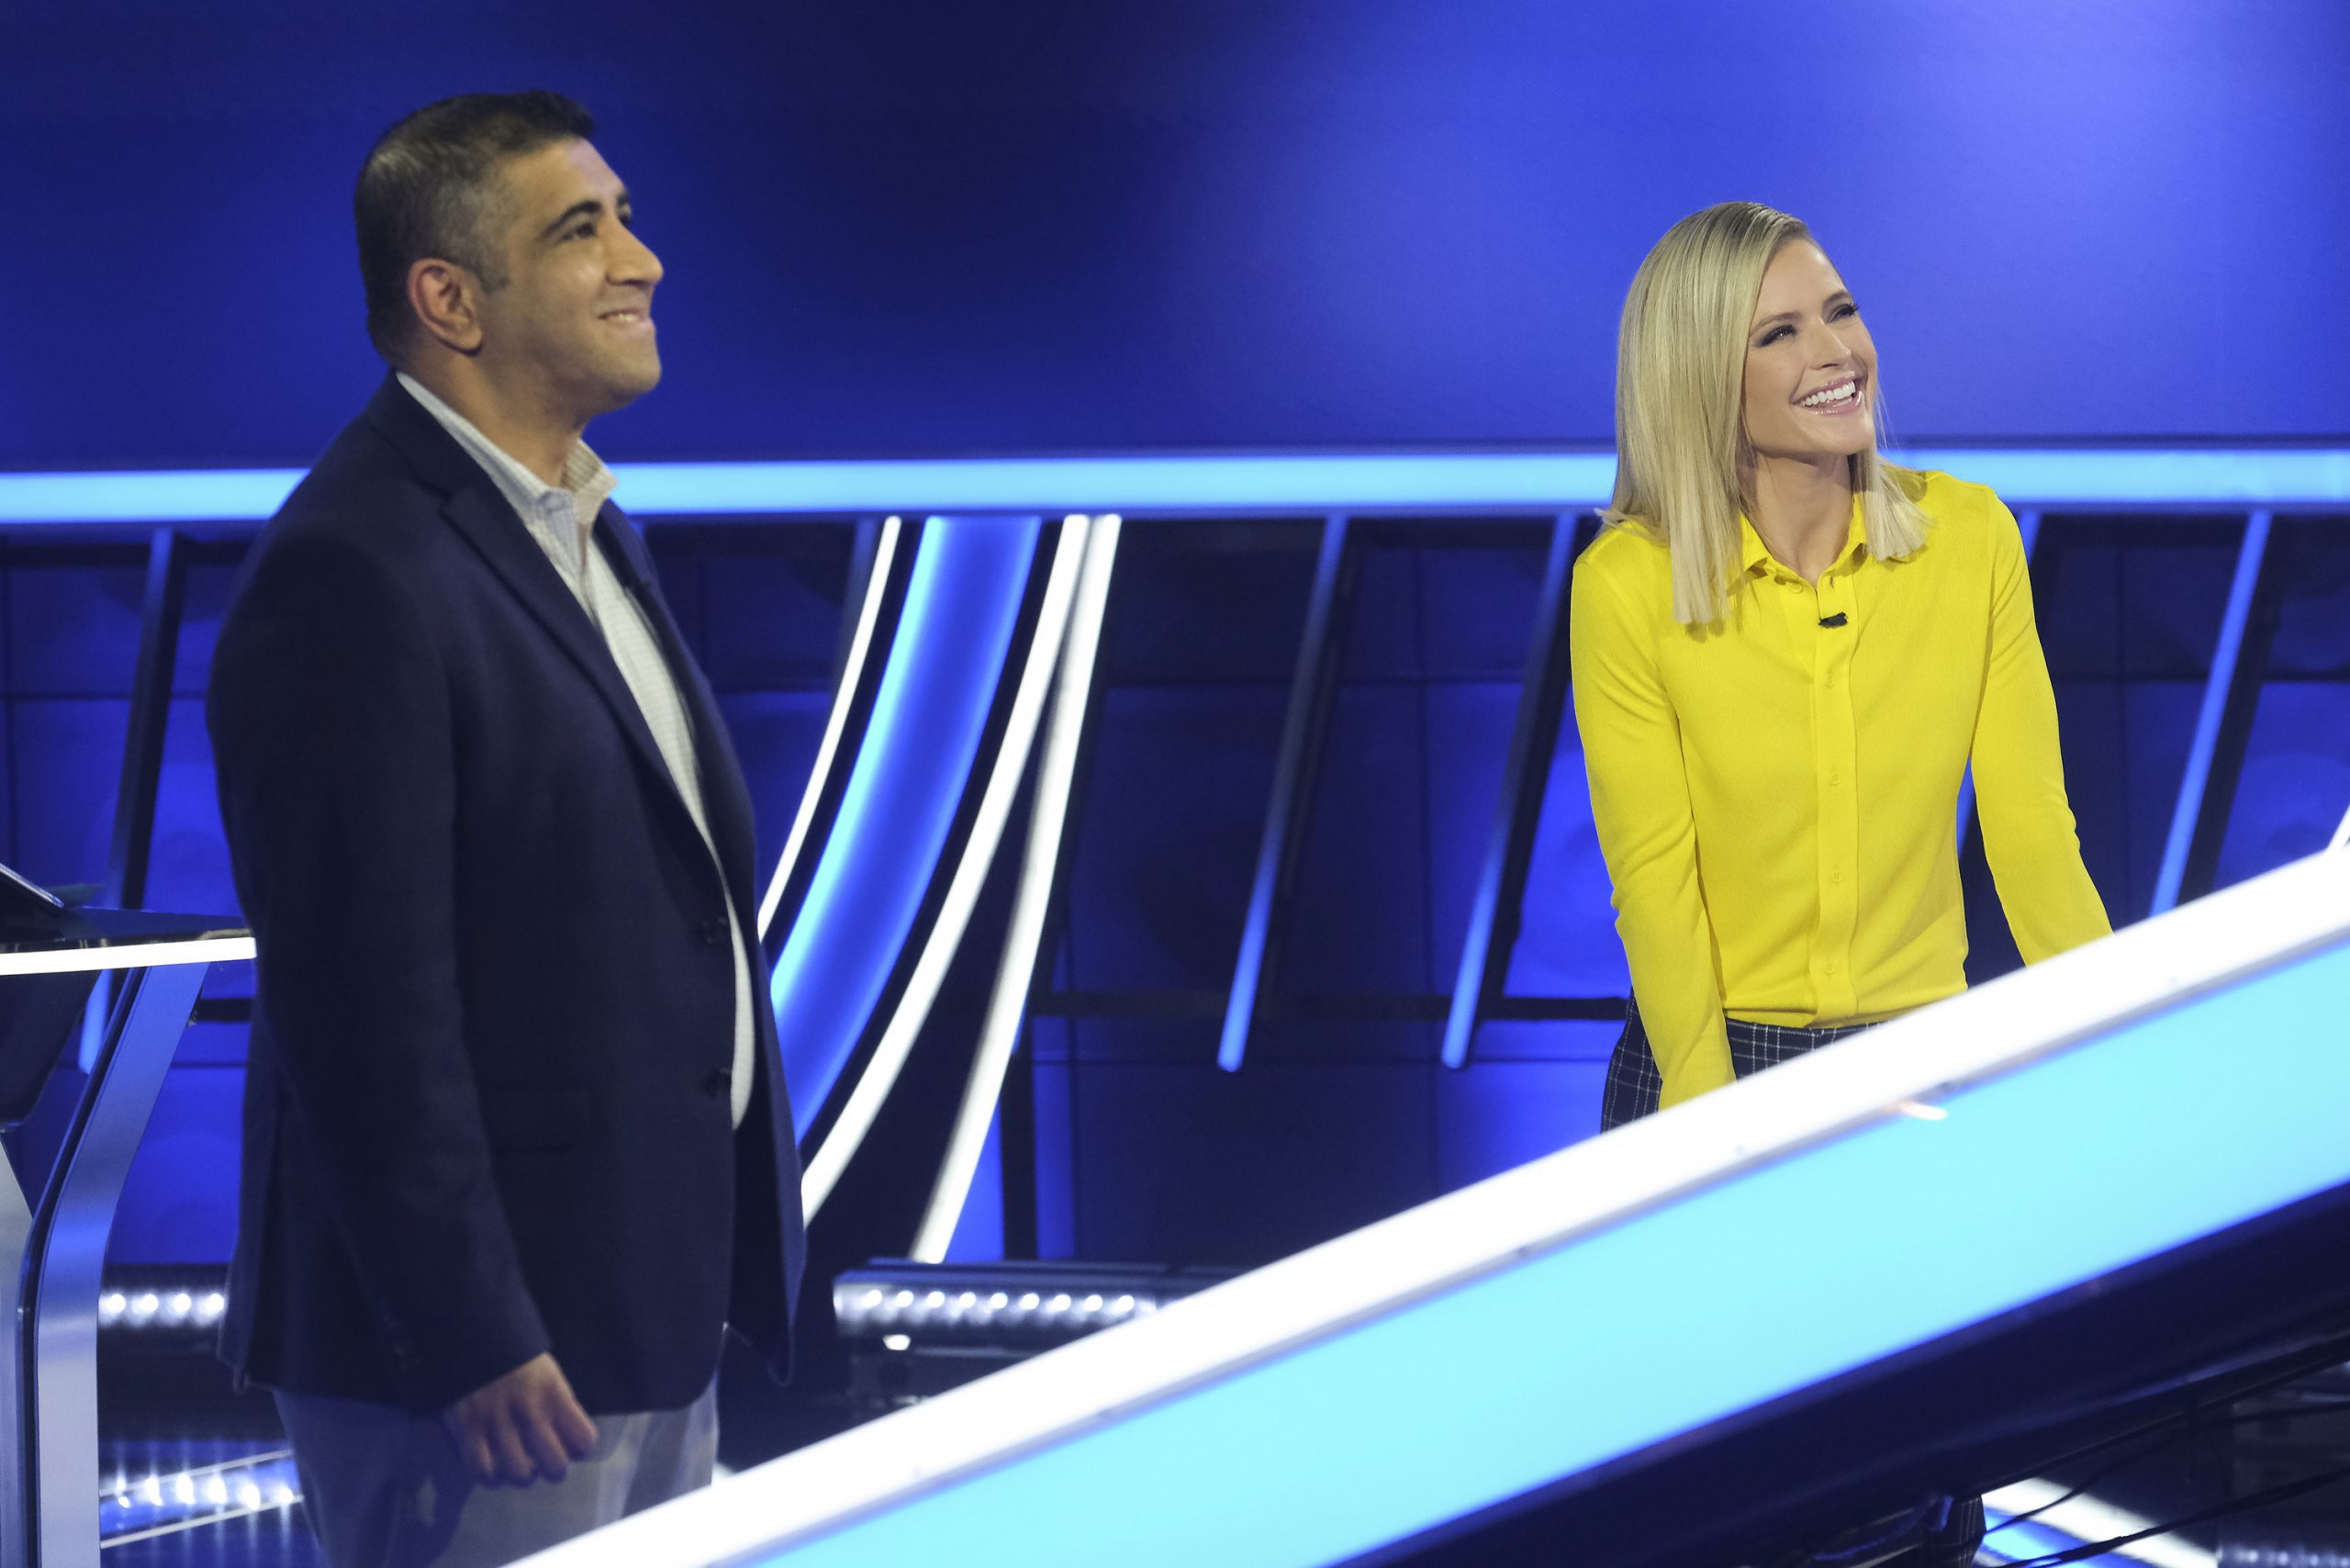 James Holzhauer on The Chase February 25, 2021